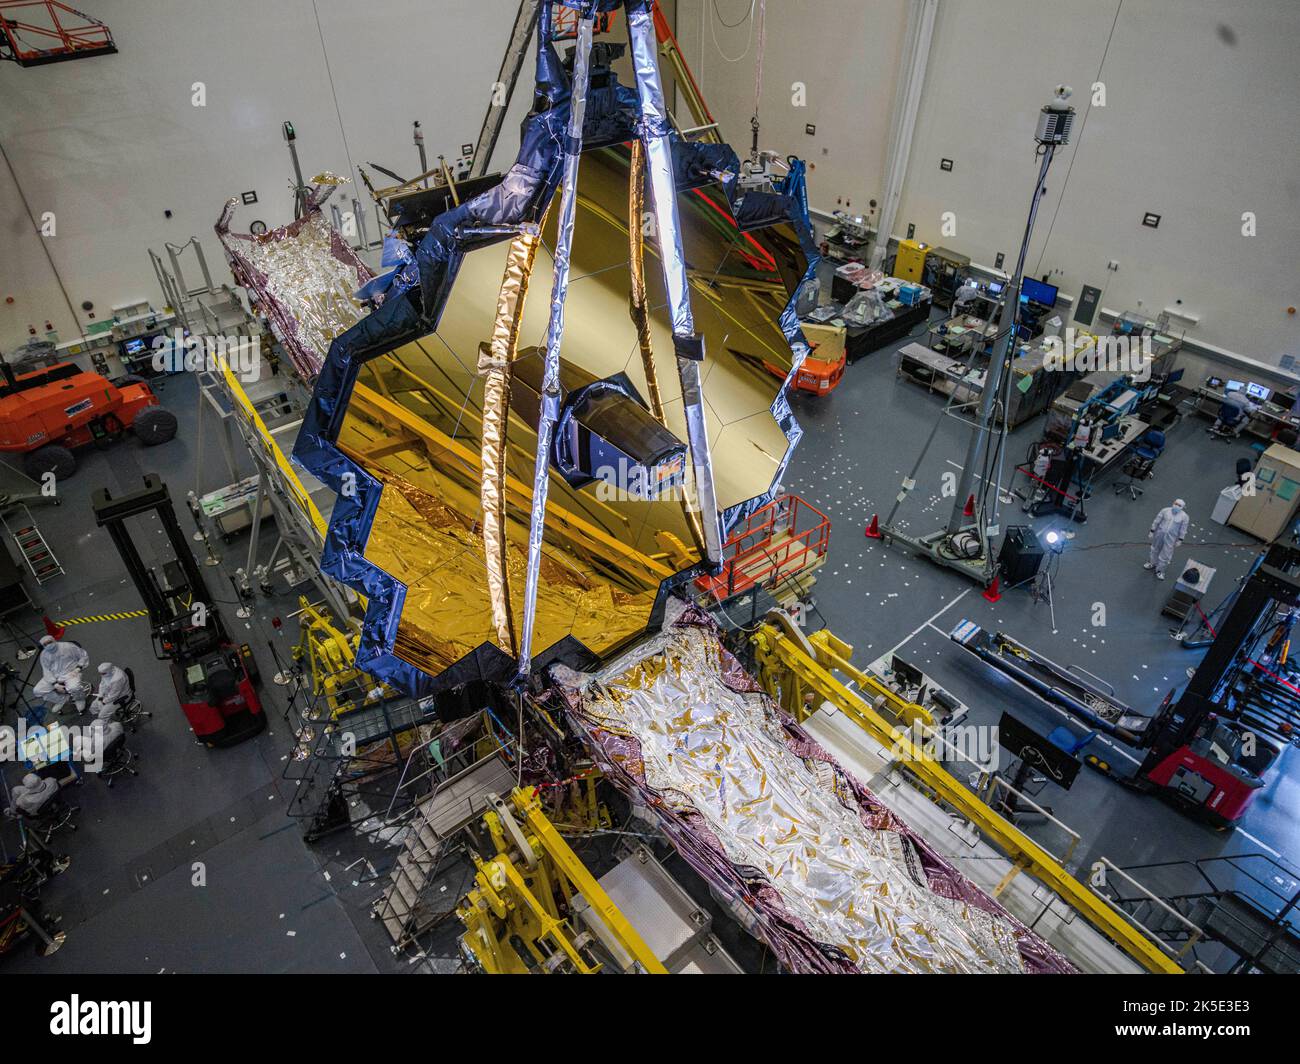 Preparing the James Webb Space Telescope (JWST) for space. Webb has the largest mirror of its kind that NASA has ever built. In March 2020, testing teams deployed Webb's 21'4' (6.5m) primary mirror into the same configuration it will have when in space.Like the art of origami, Webb is a collection of movable parts that have been specifically designed to fold to a compact formation that is considerably smaller than when the observatory is fully deployed. An optimised version of a NASA image by experienced lead photographer Chris Gunn. Credit: NASA/Chris Gunn. For editorial use only Stock Photo